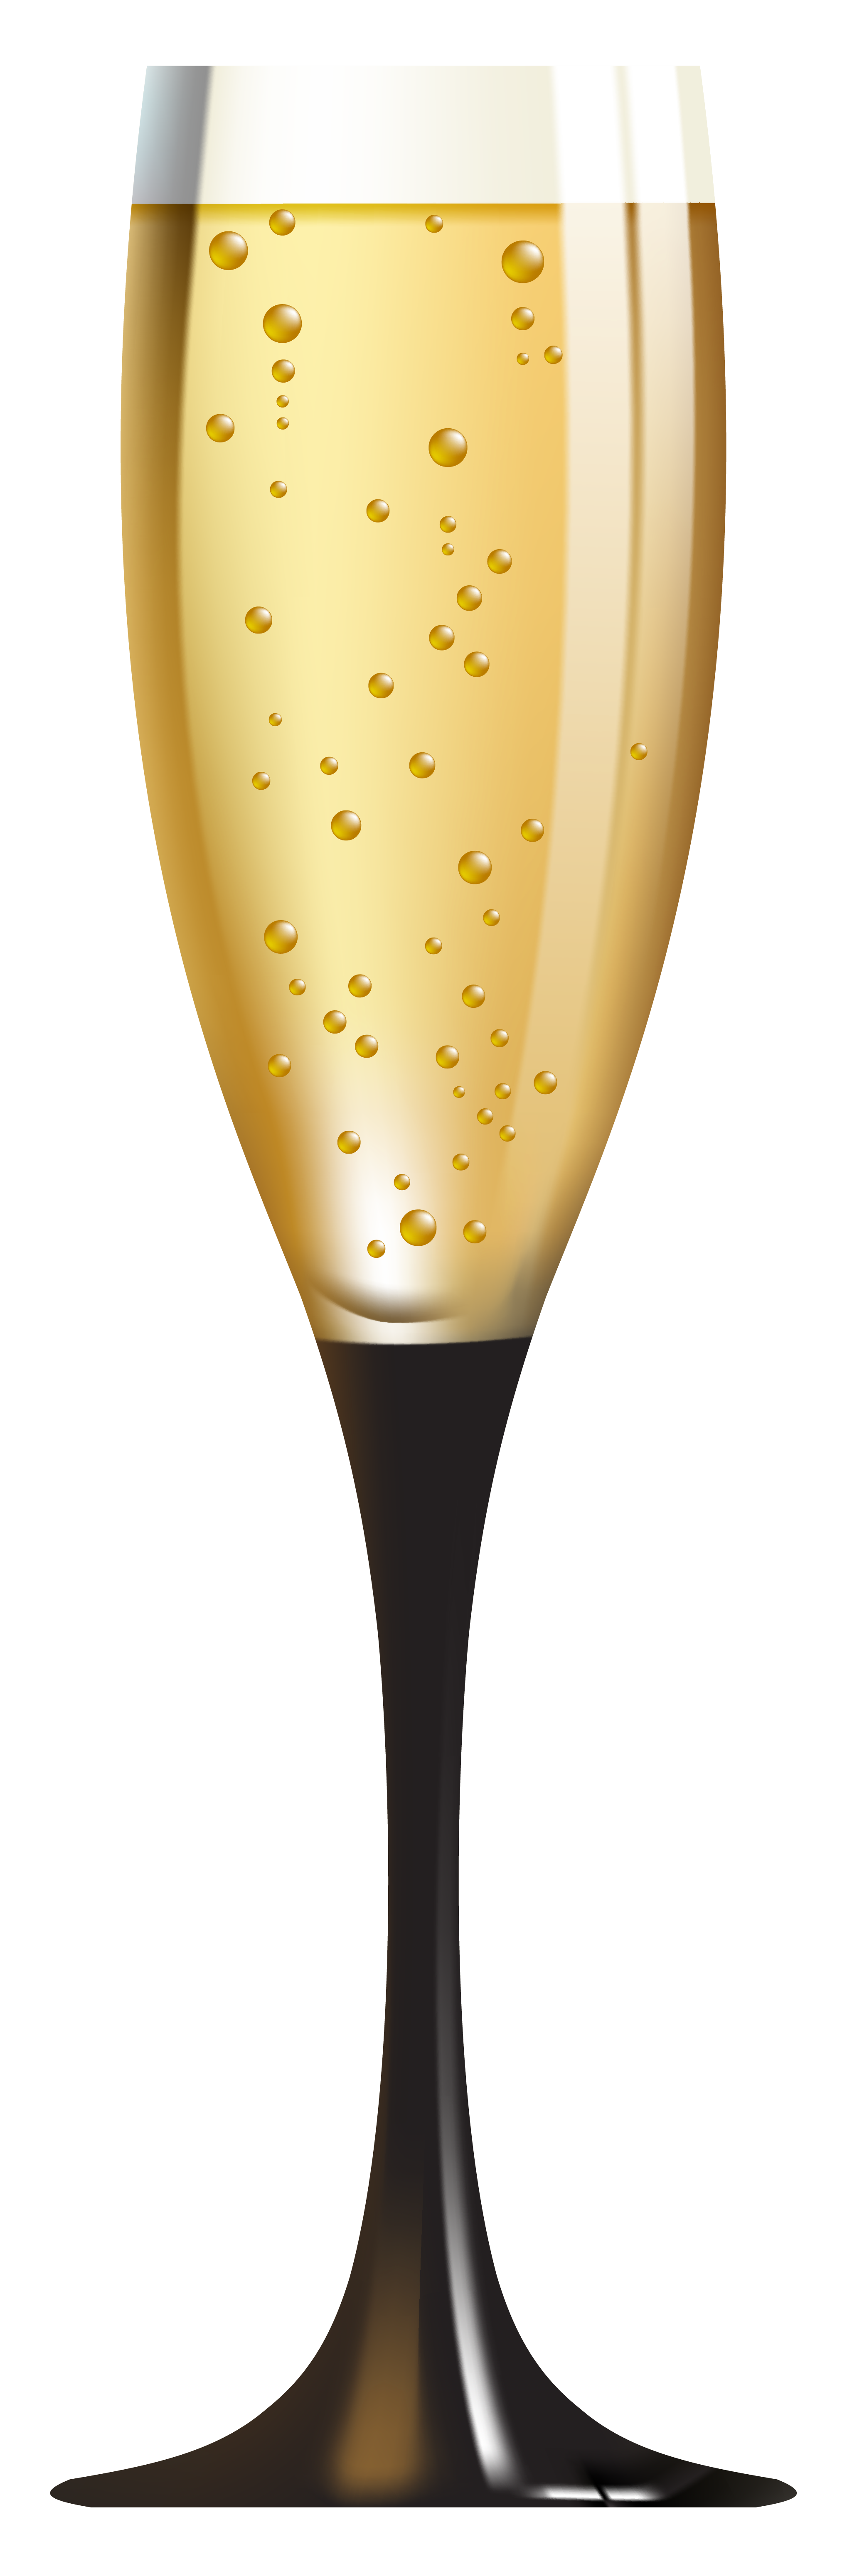 Champagne bottle popping png. Transparent images all free